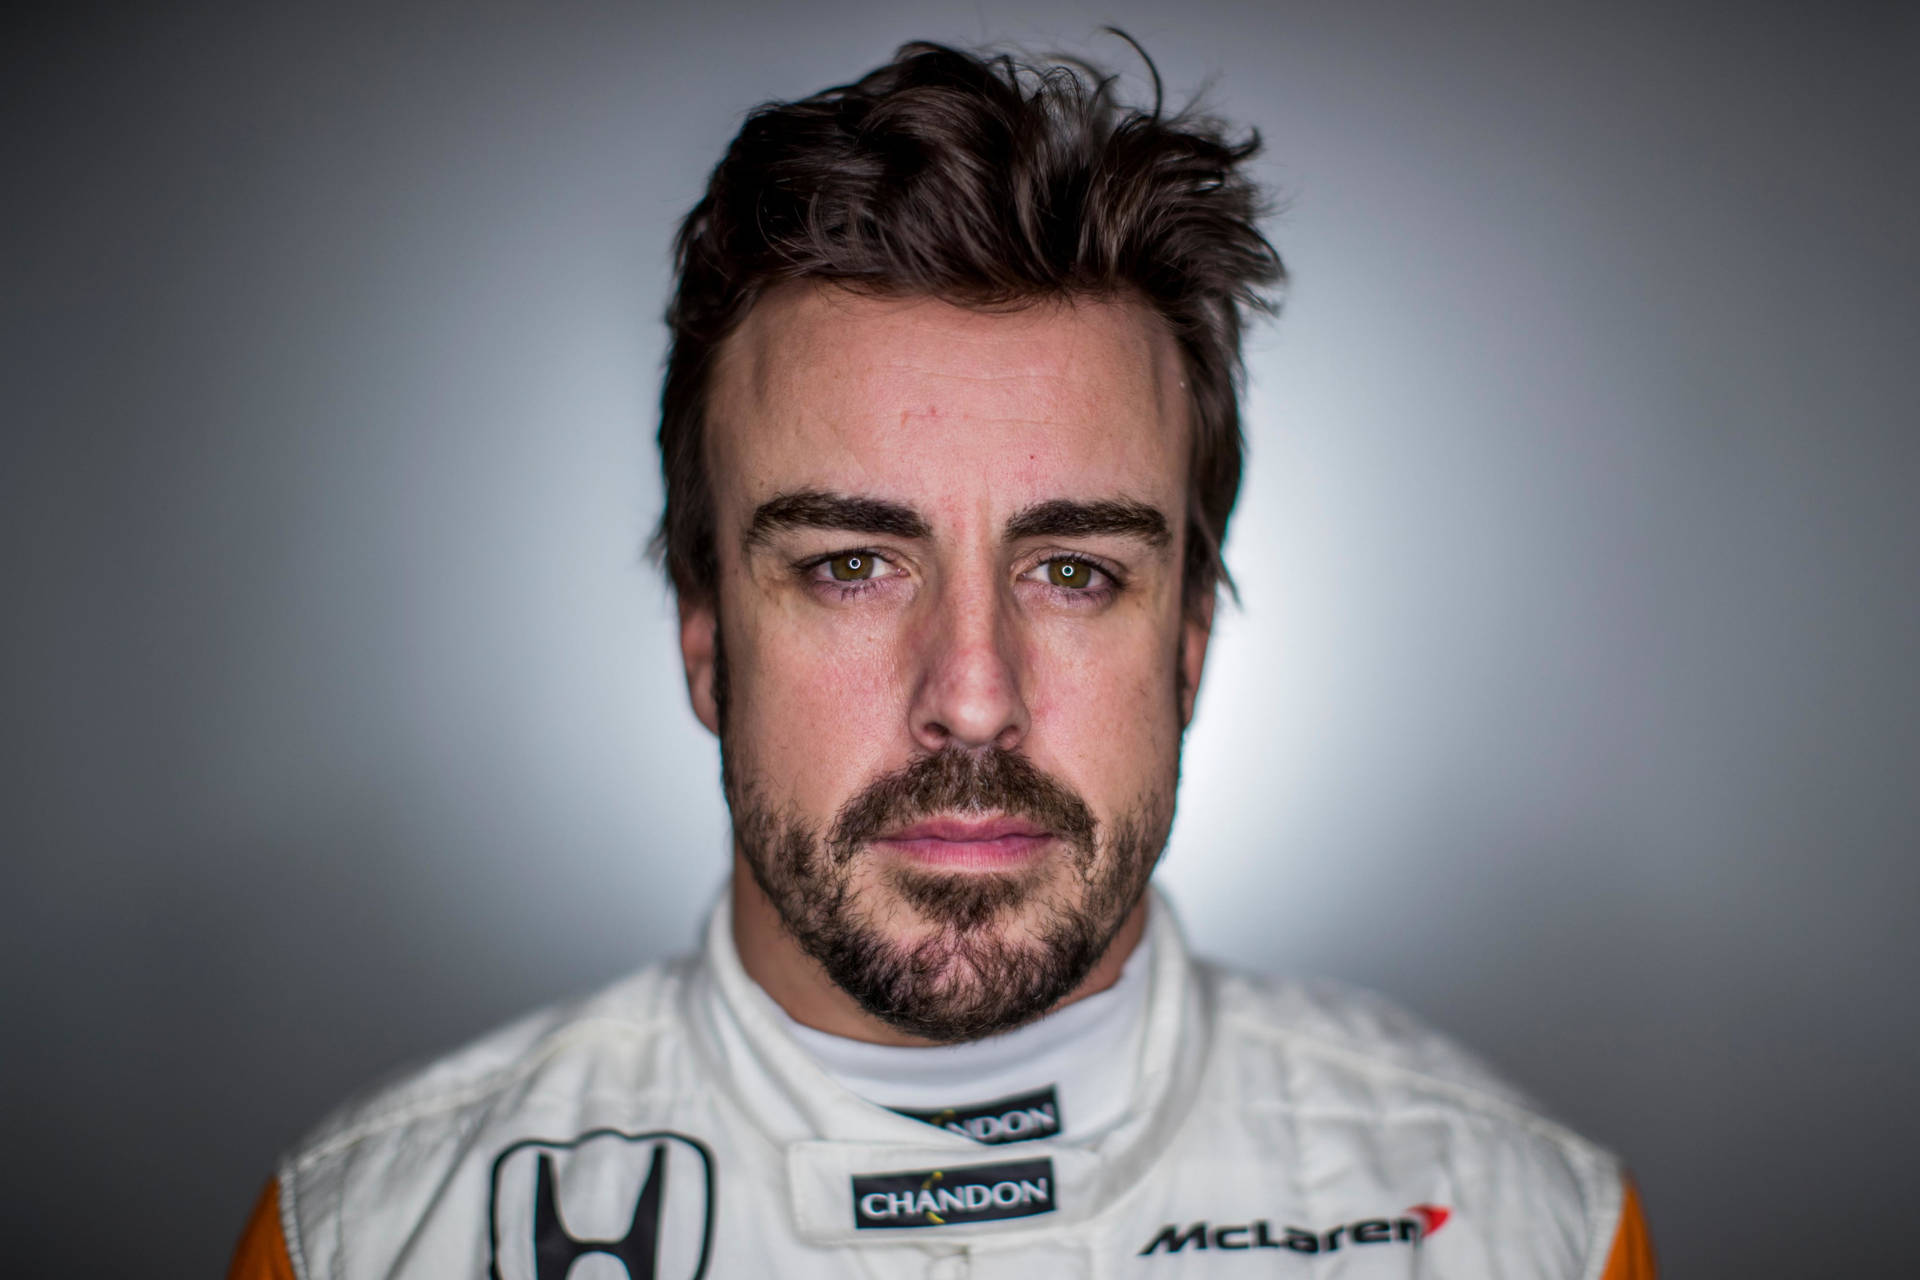 Fernando Alonso HD Wallpapers and Backgrounds